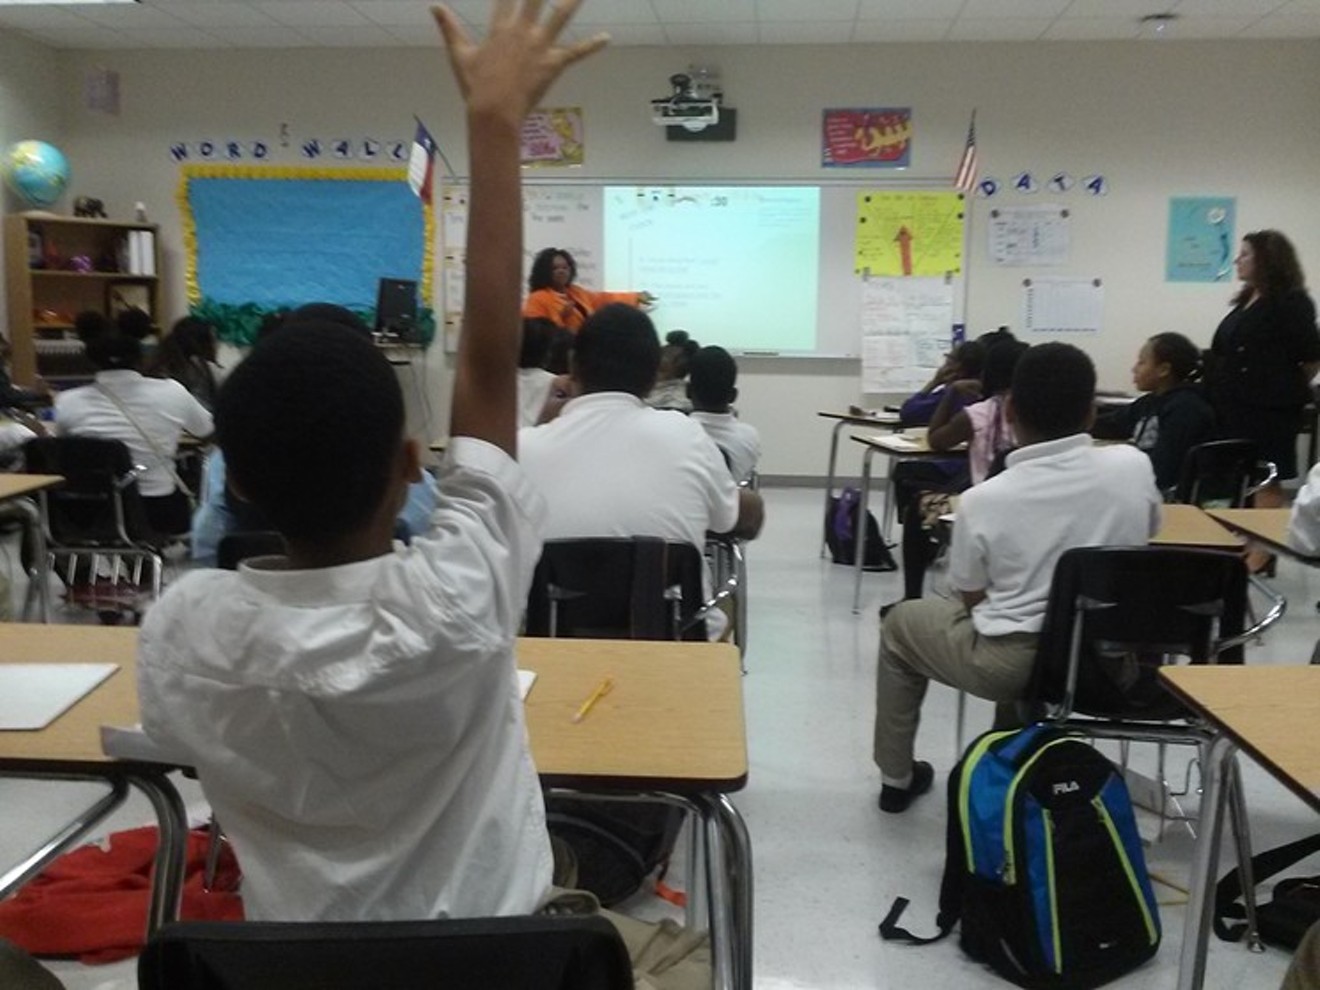 Dallas ISD students in this classroom would earn high marks for attentiveness.